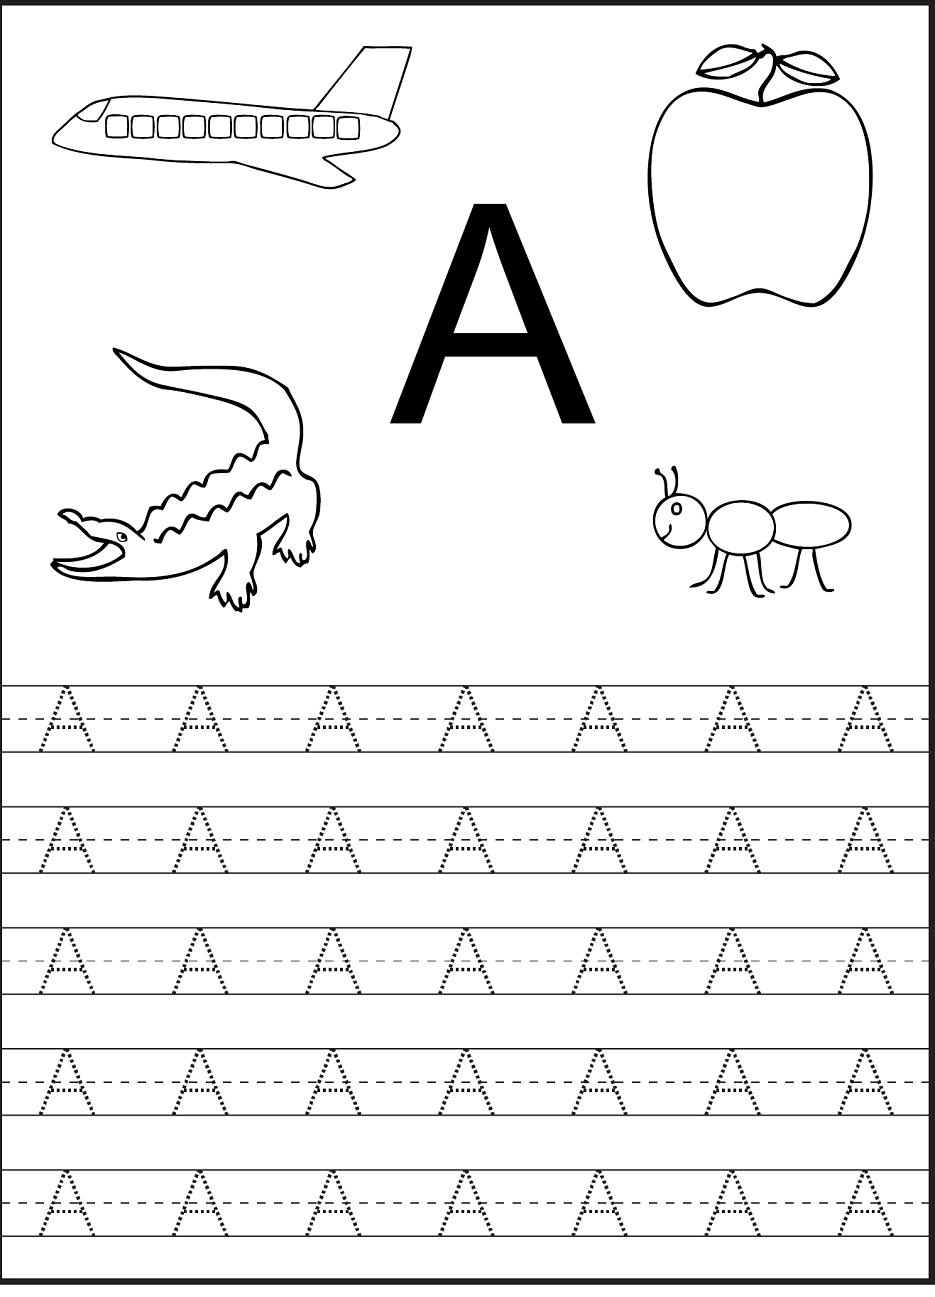 Tracing The Letter A Free Printable | Free Preschool in A Letter Tracing Worksheet